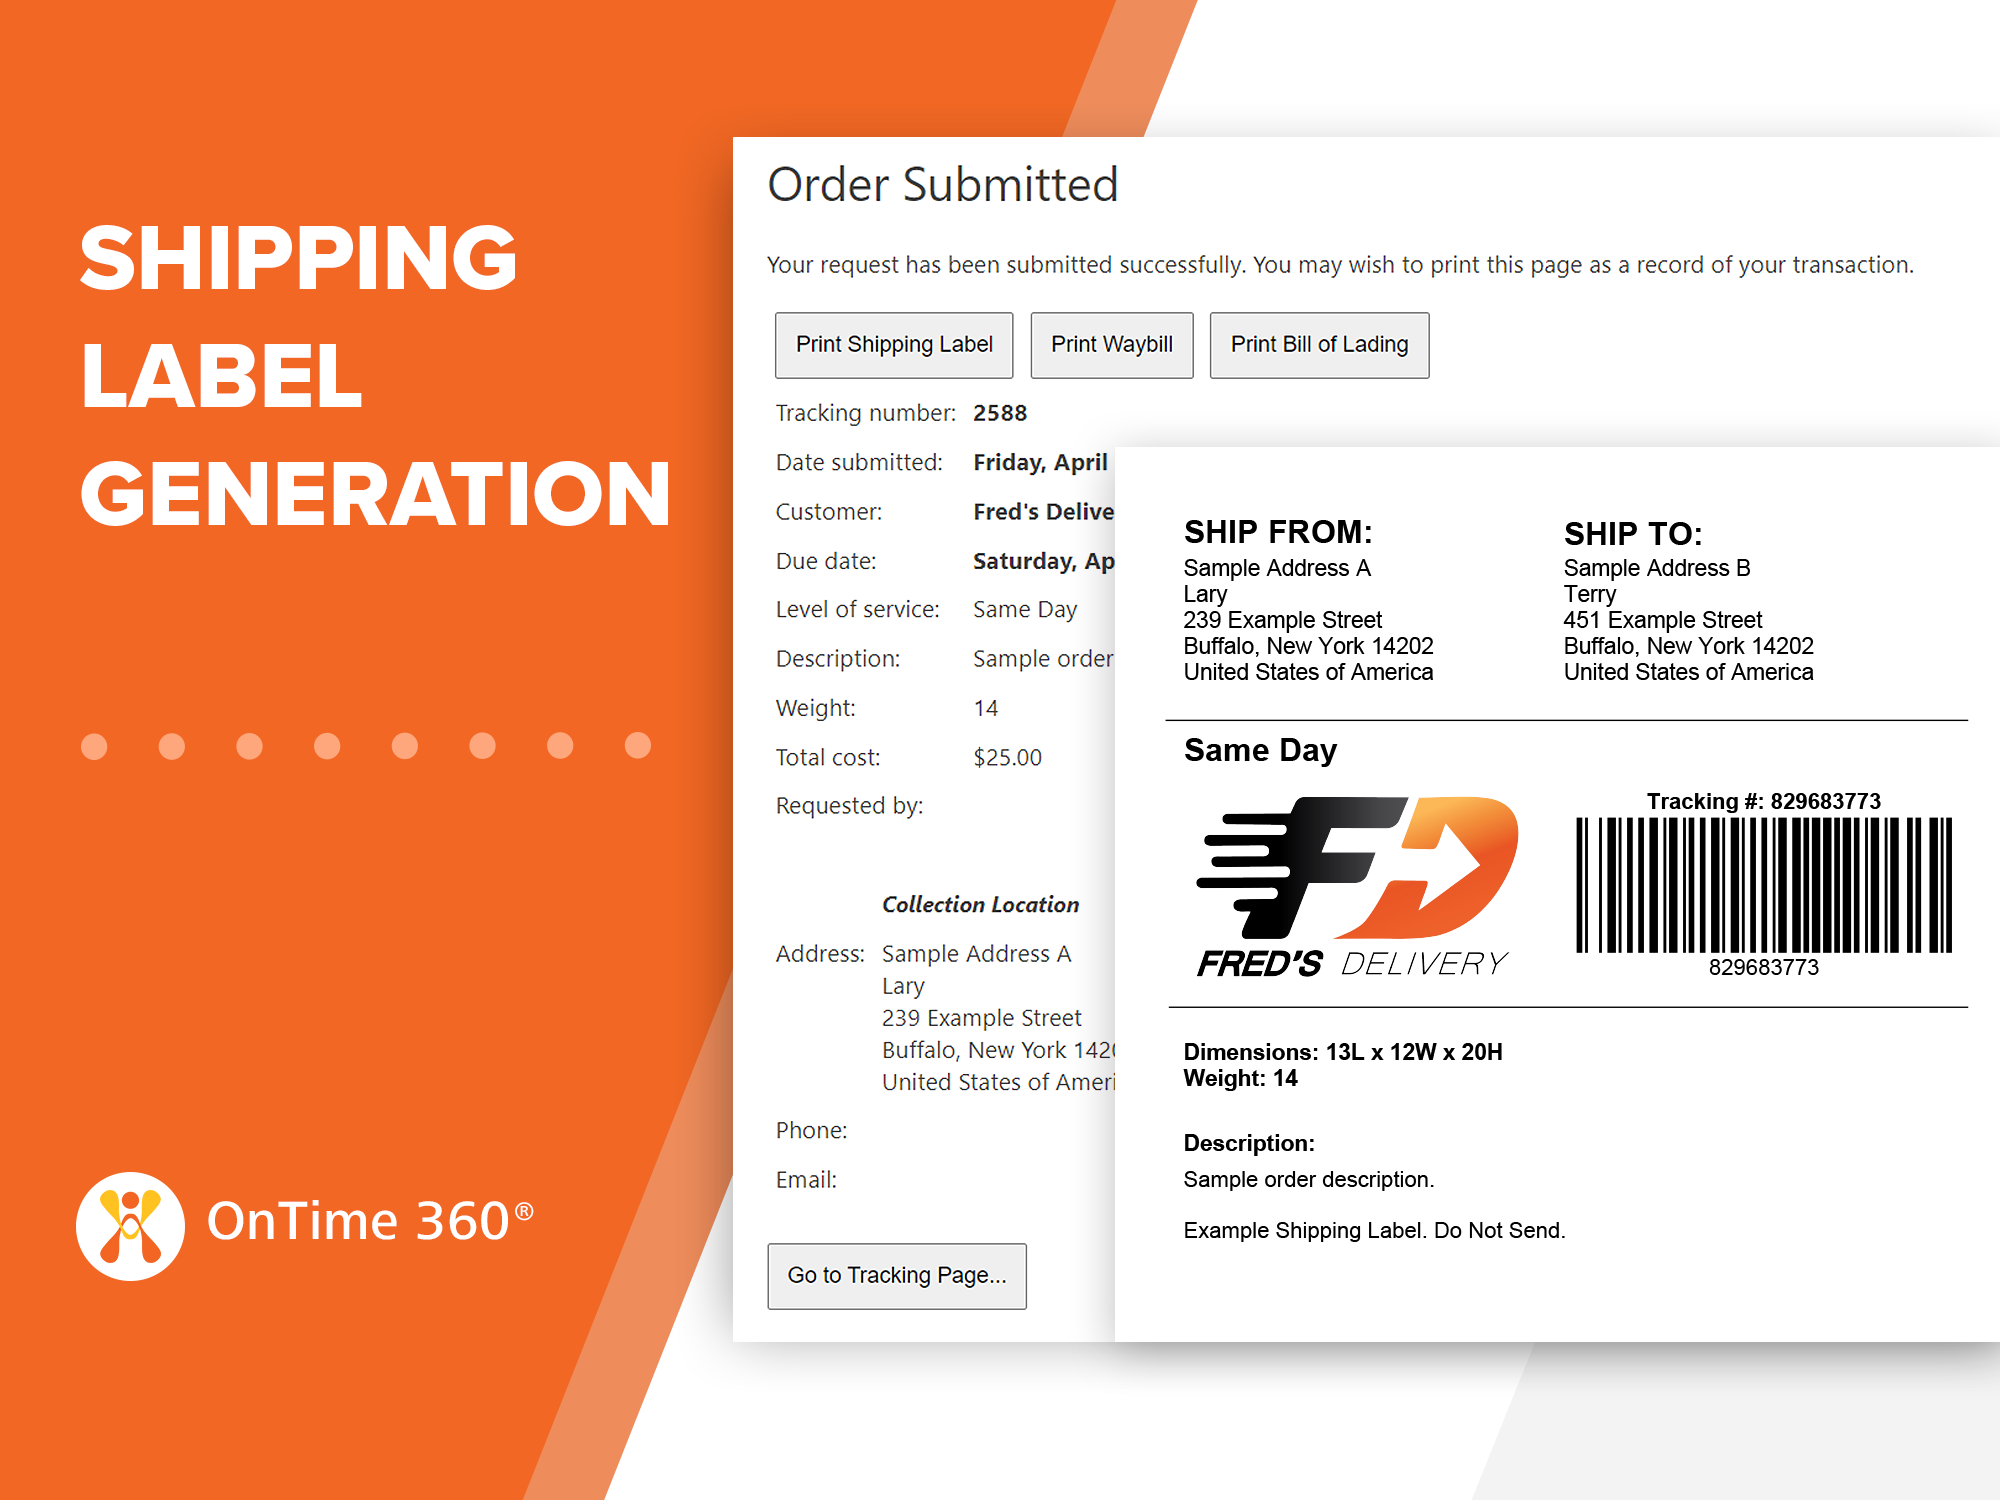 OnTime 360 Software - Generate Custom Shipping Labels with Barcodes